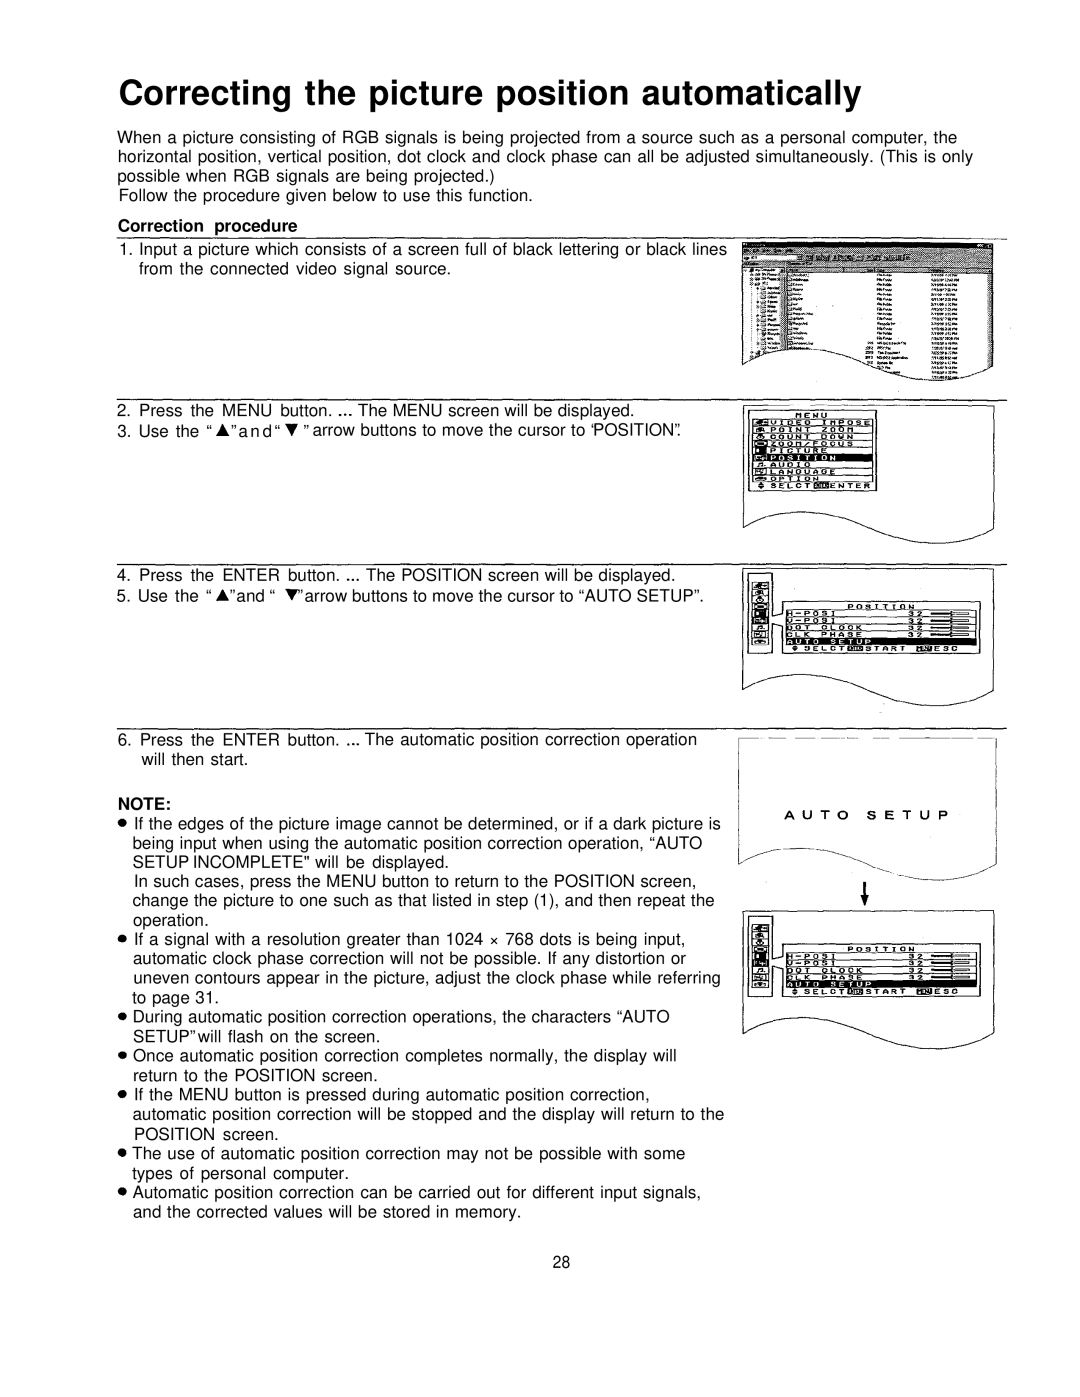 Panasonic PT-L795U manual Correcting the picture position automatically, Correction procedure 